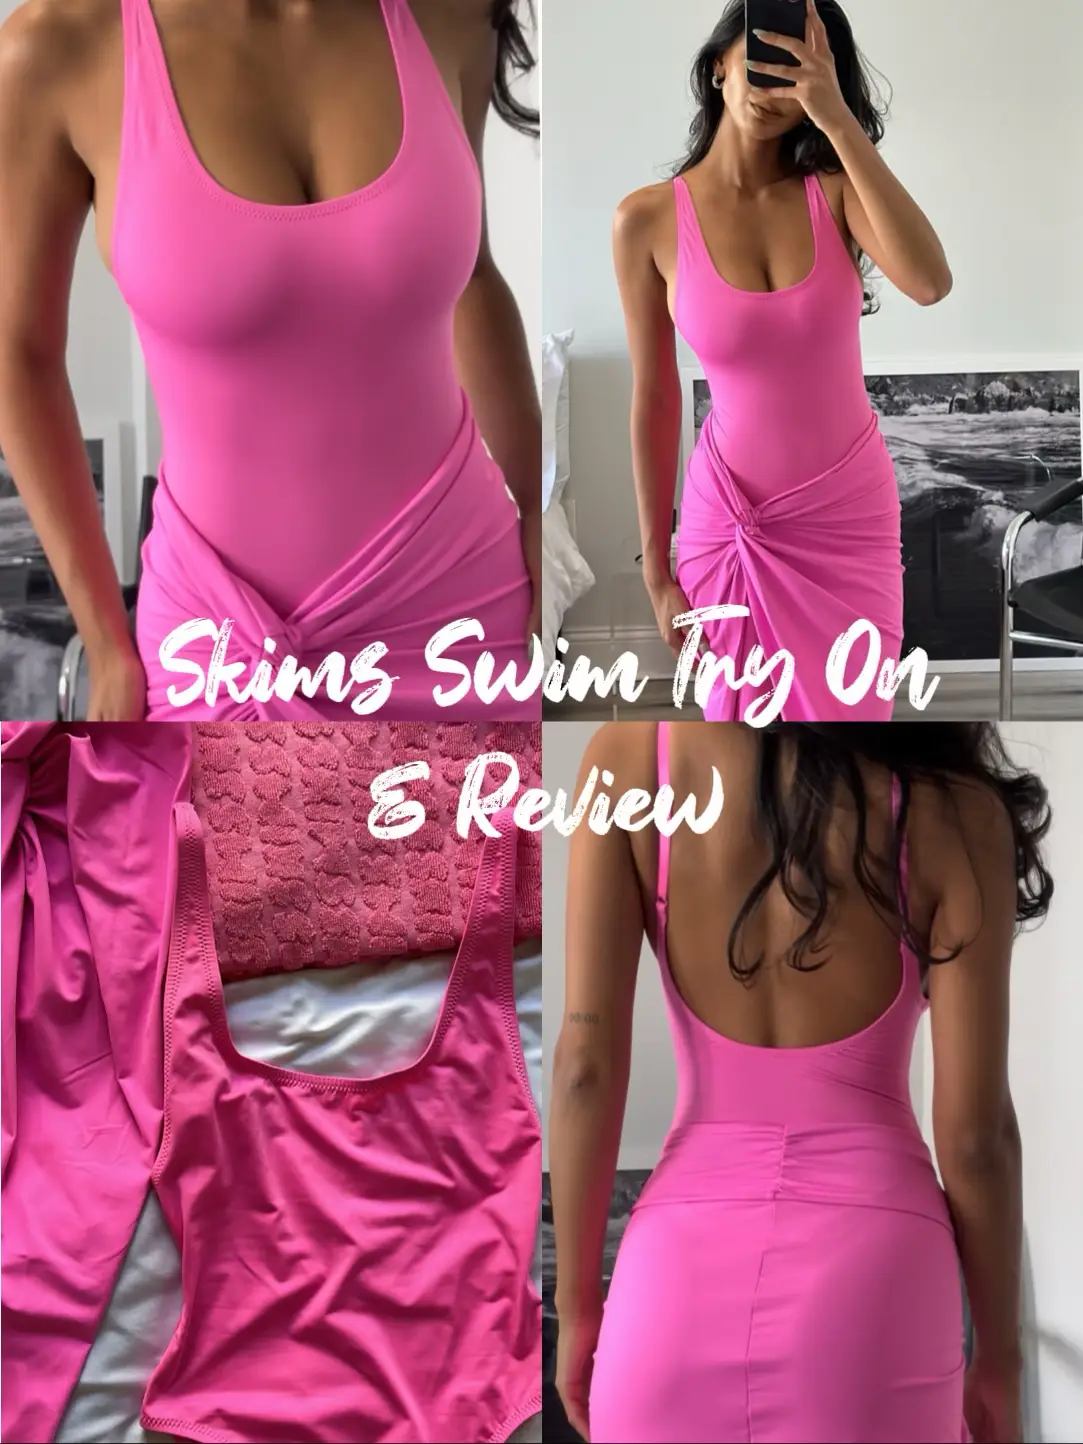 SKIMS PLUS SIZE HAUL : TRYING THE VIRAL SKIMS DRESS AND NEW SWIM